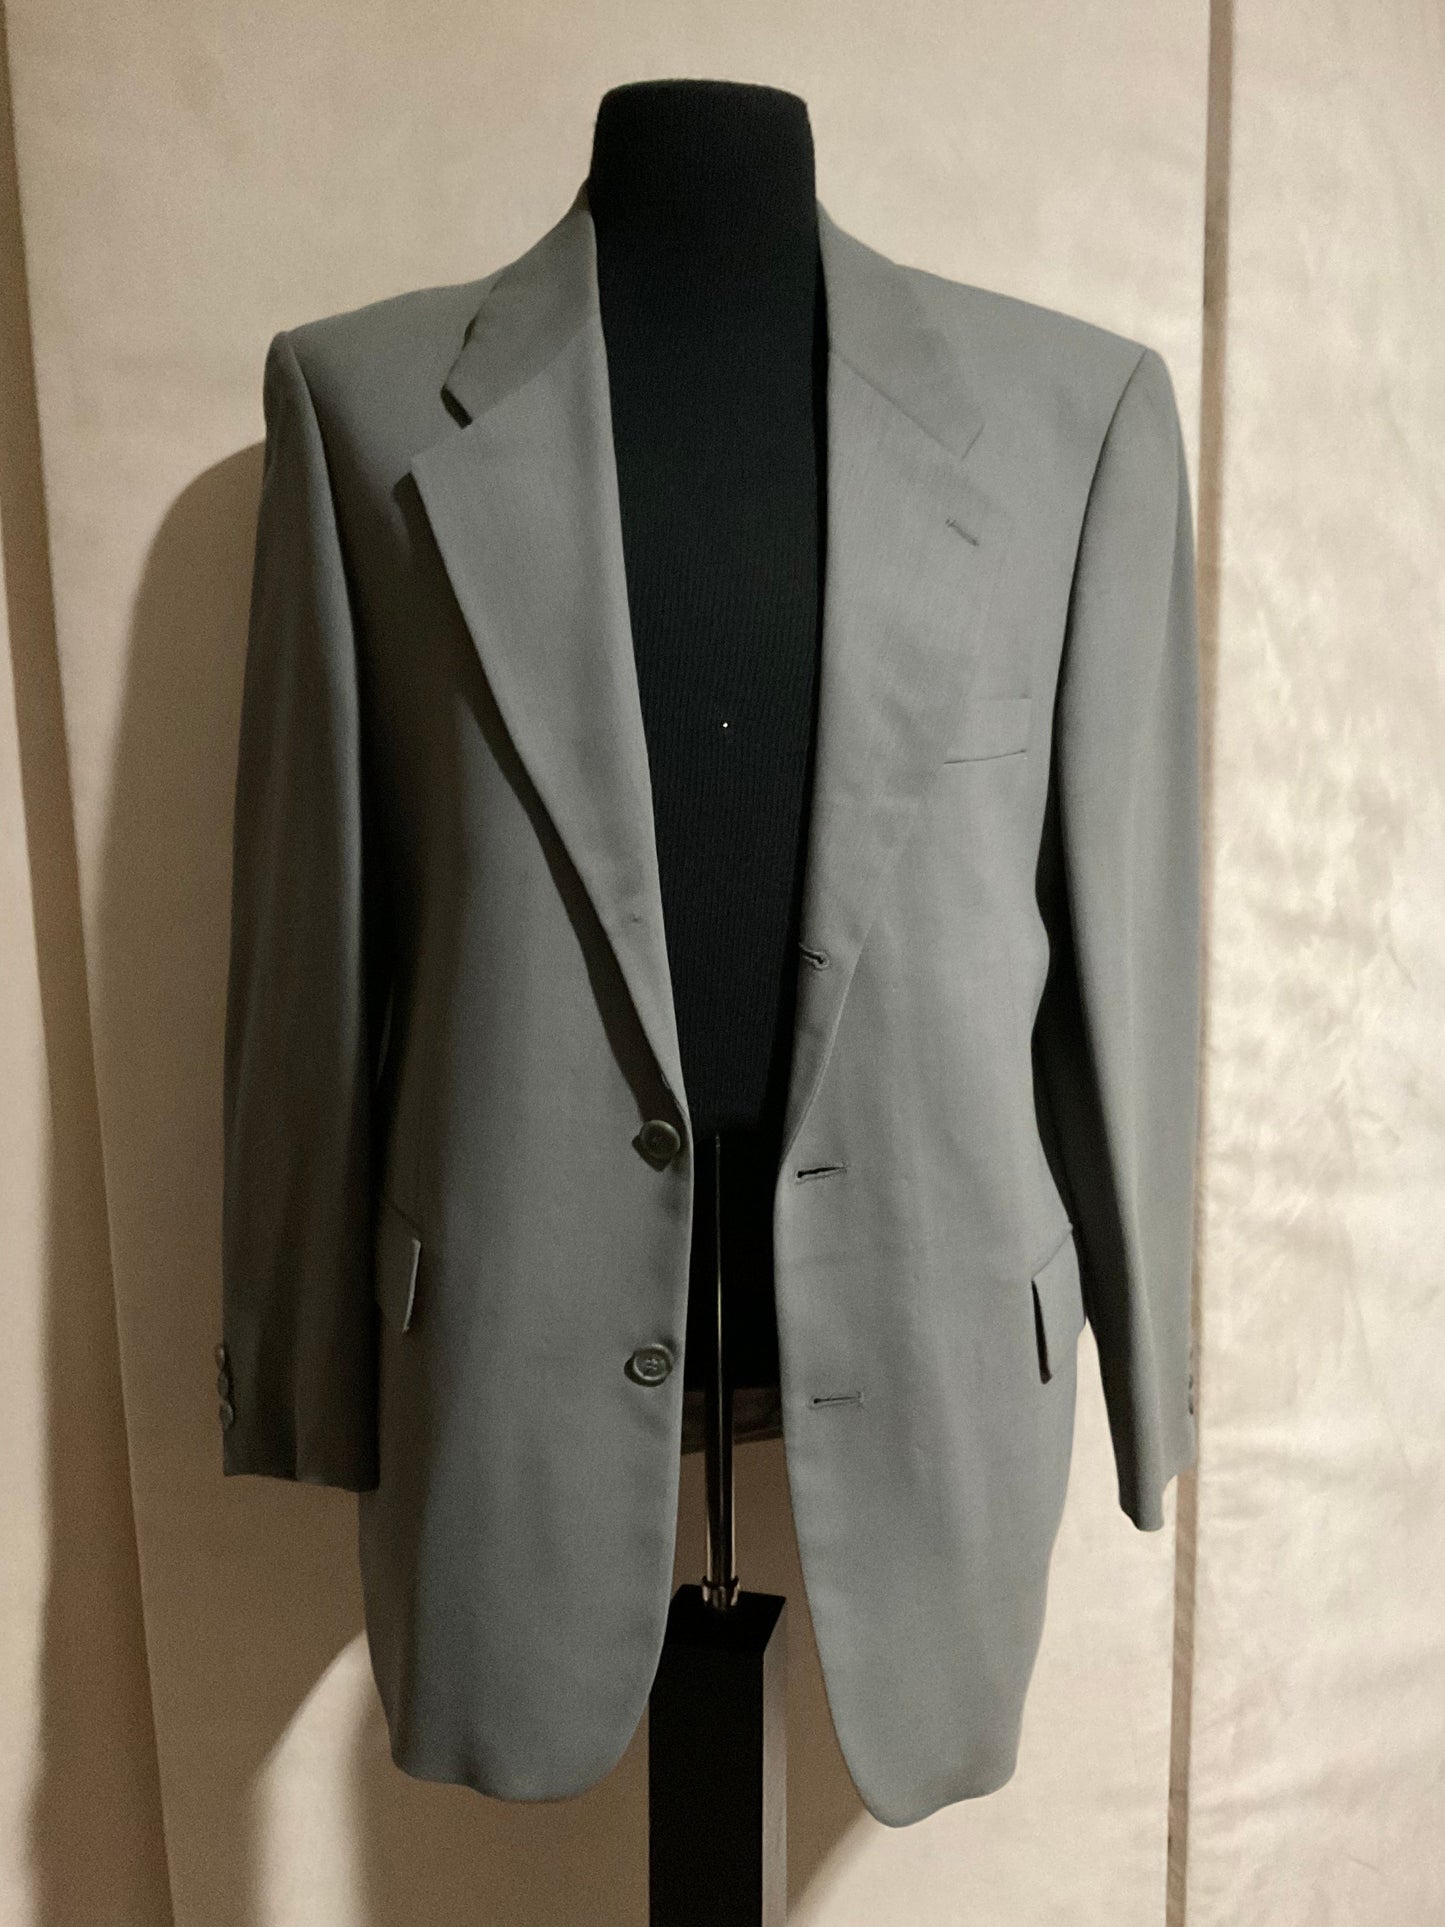 R P SUIT / OLIVE CREPE / 40 REGULAR / MADE IN EUROPE